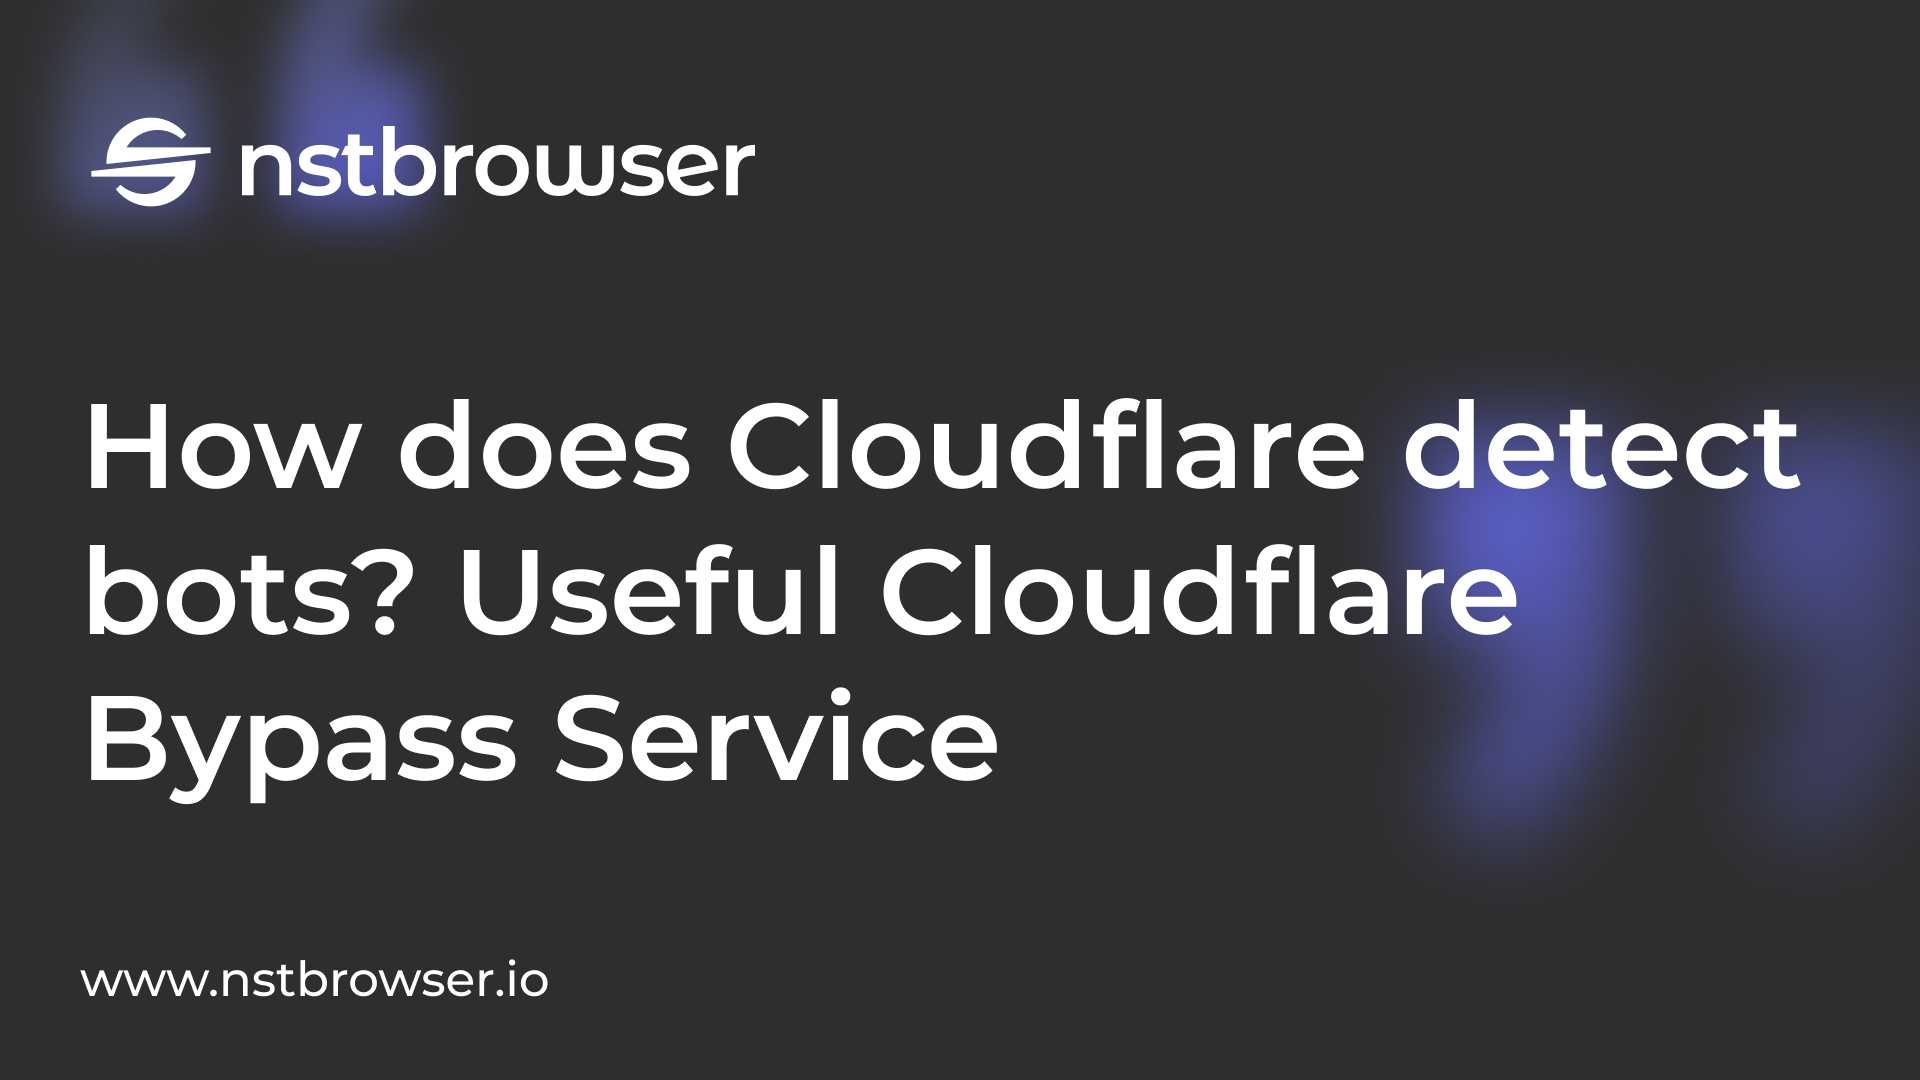 Useful Cloudflare Bypass Service